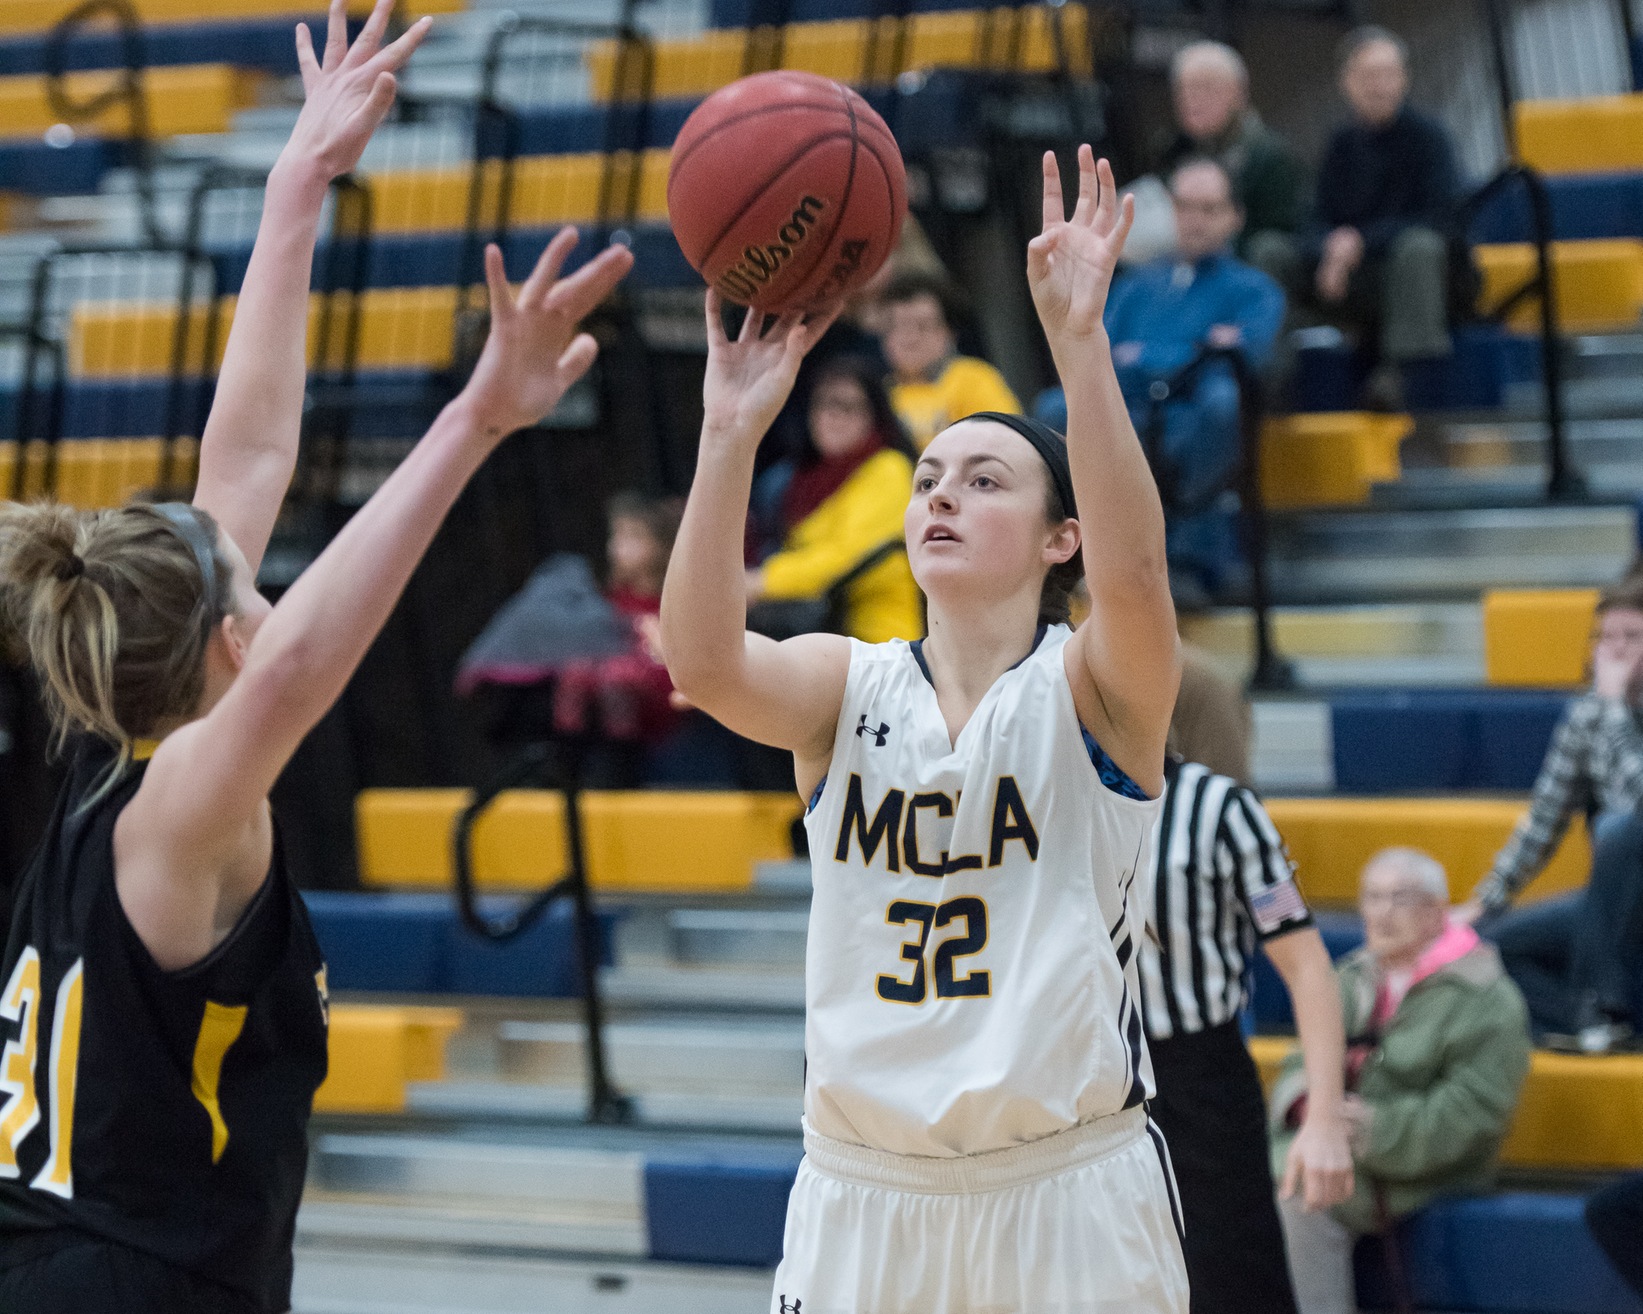 Pingelski scores 18, but Trailblazers falter late in loss to Bears